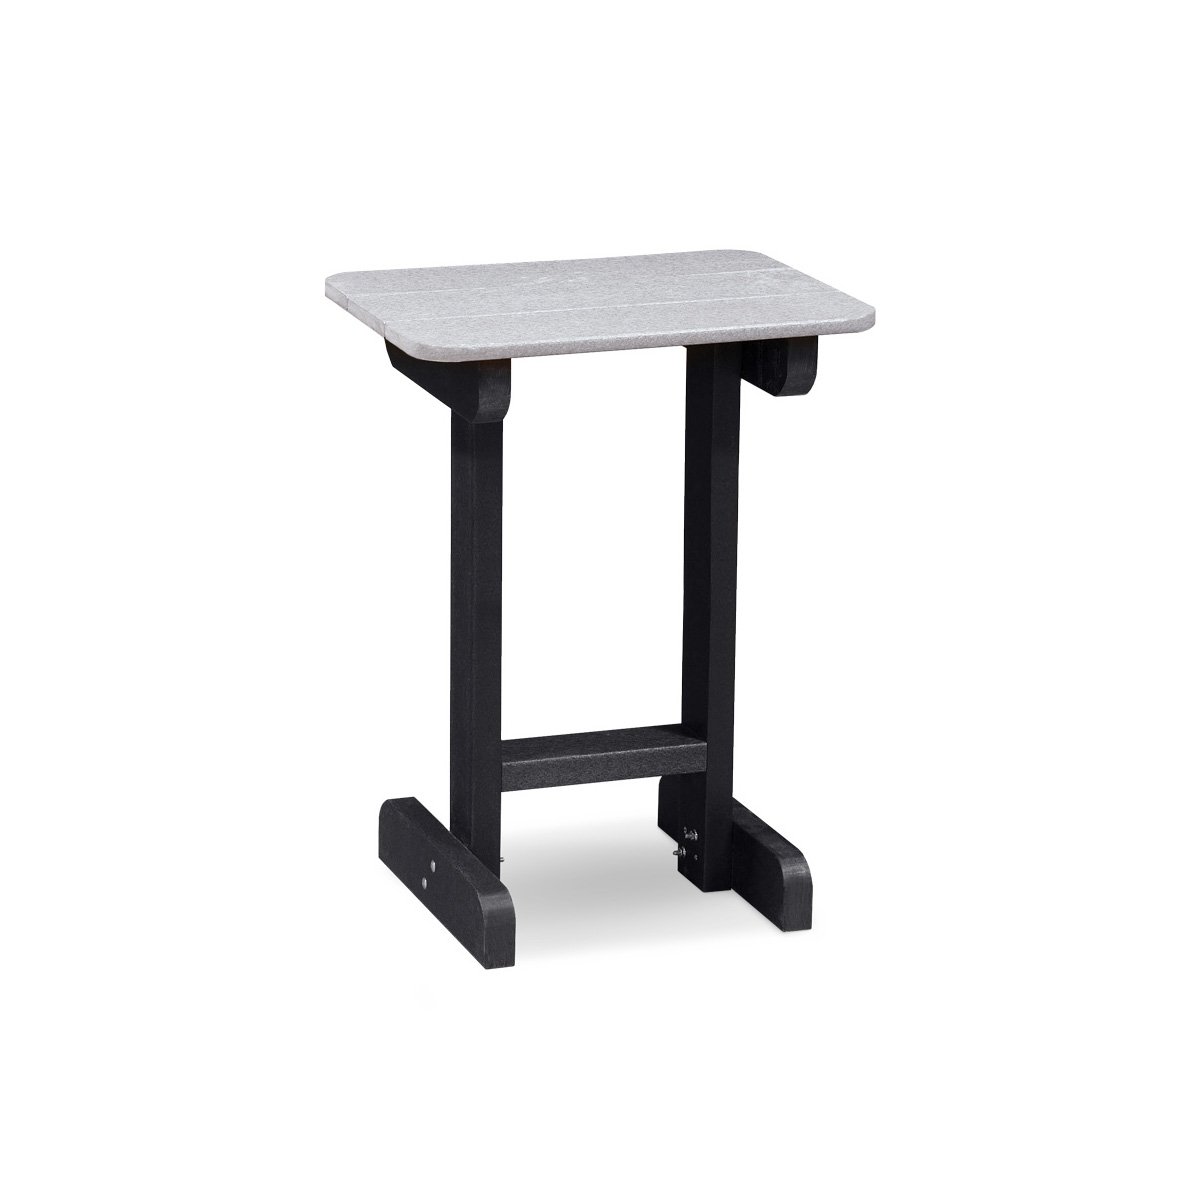 30 inch Recycled Poly End Table - Express Outdoor Furniture Simply Amish Grey and Black 